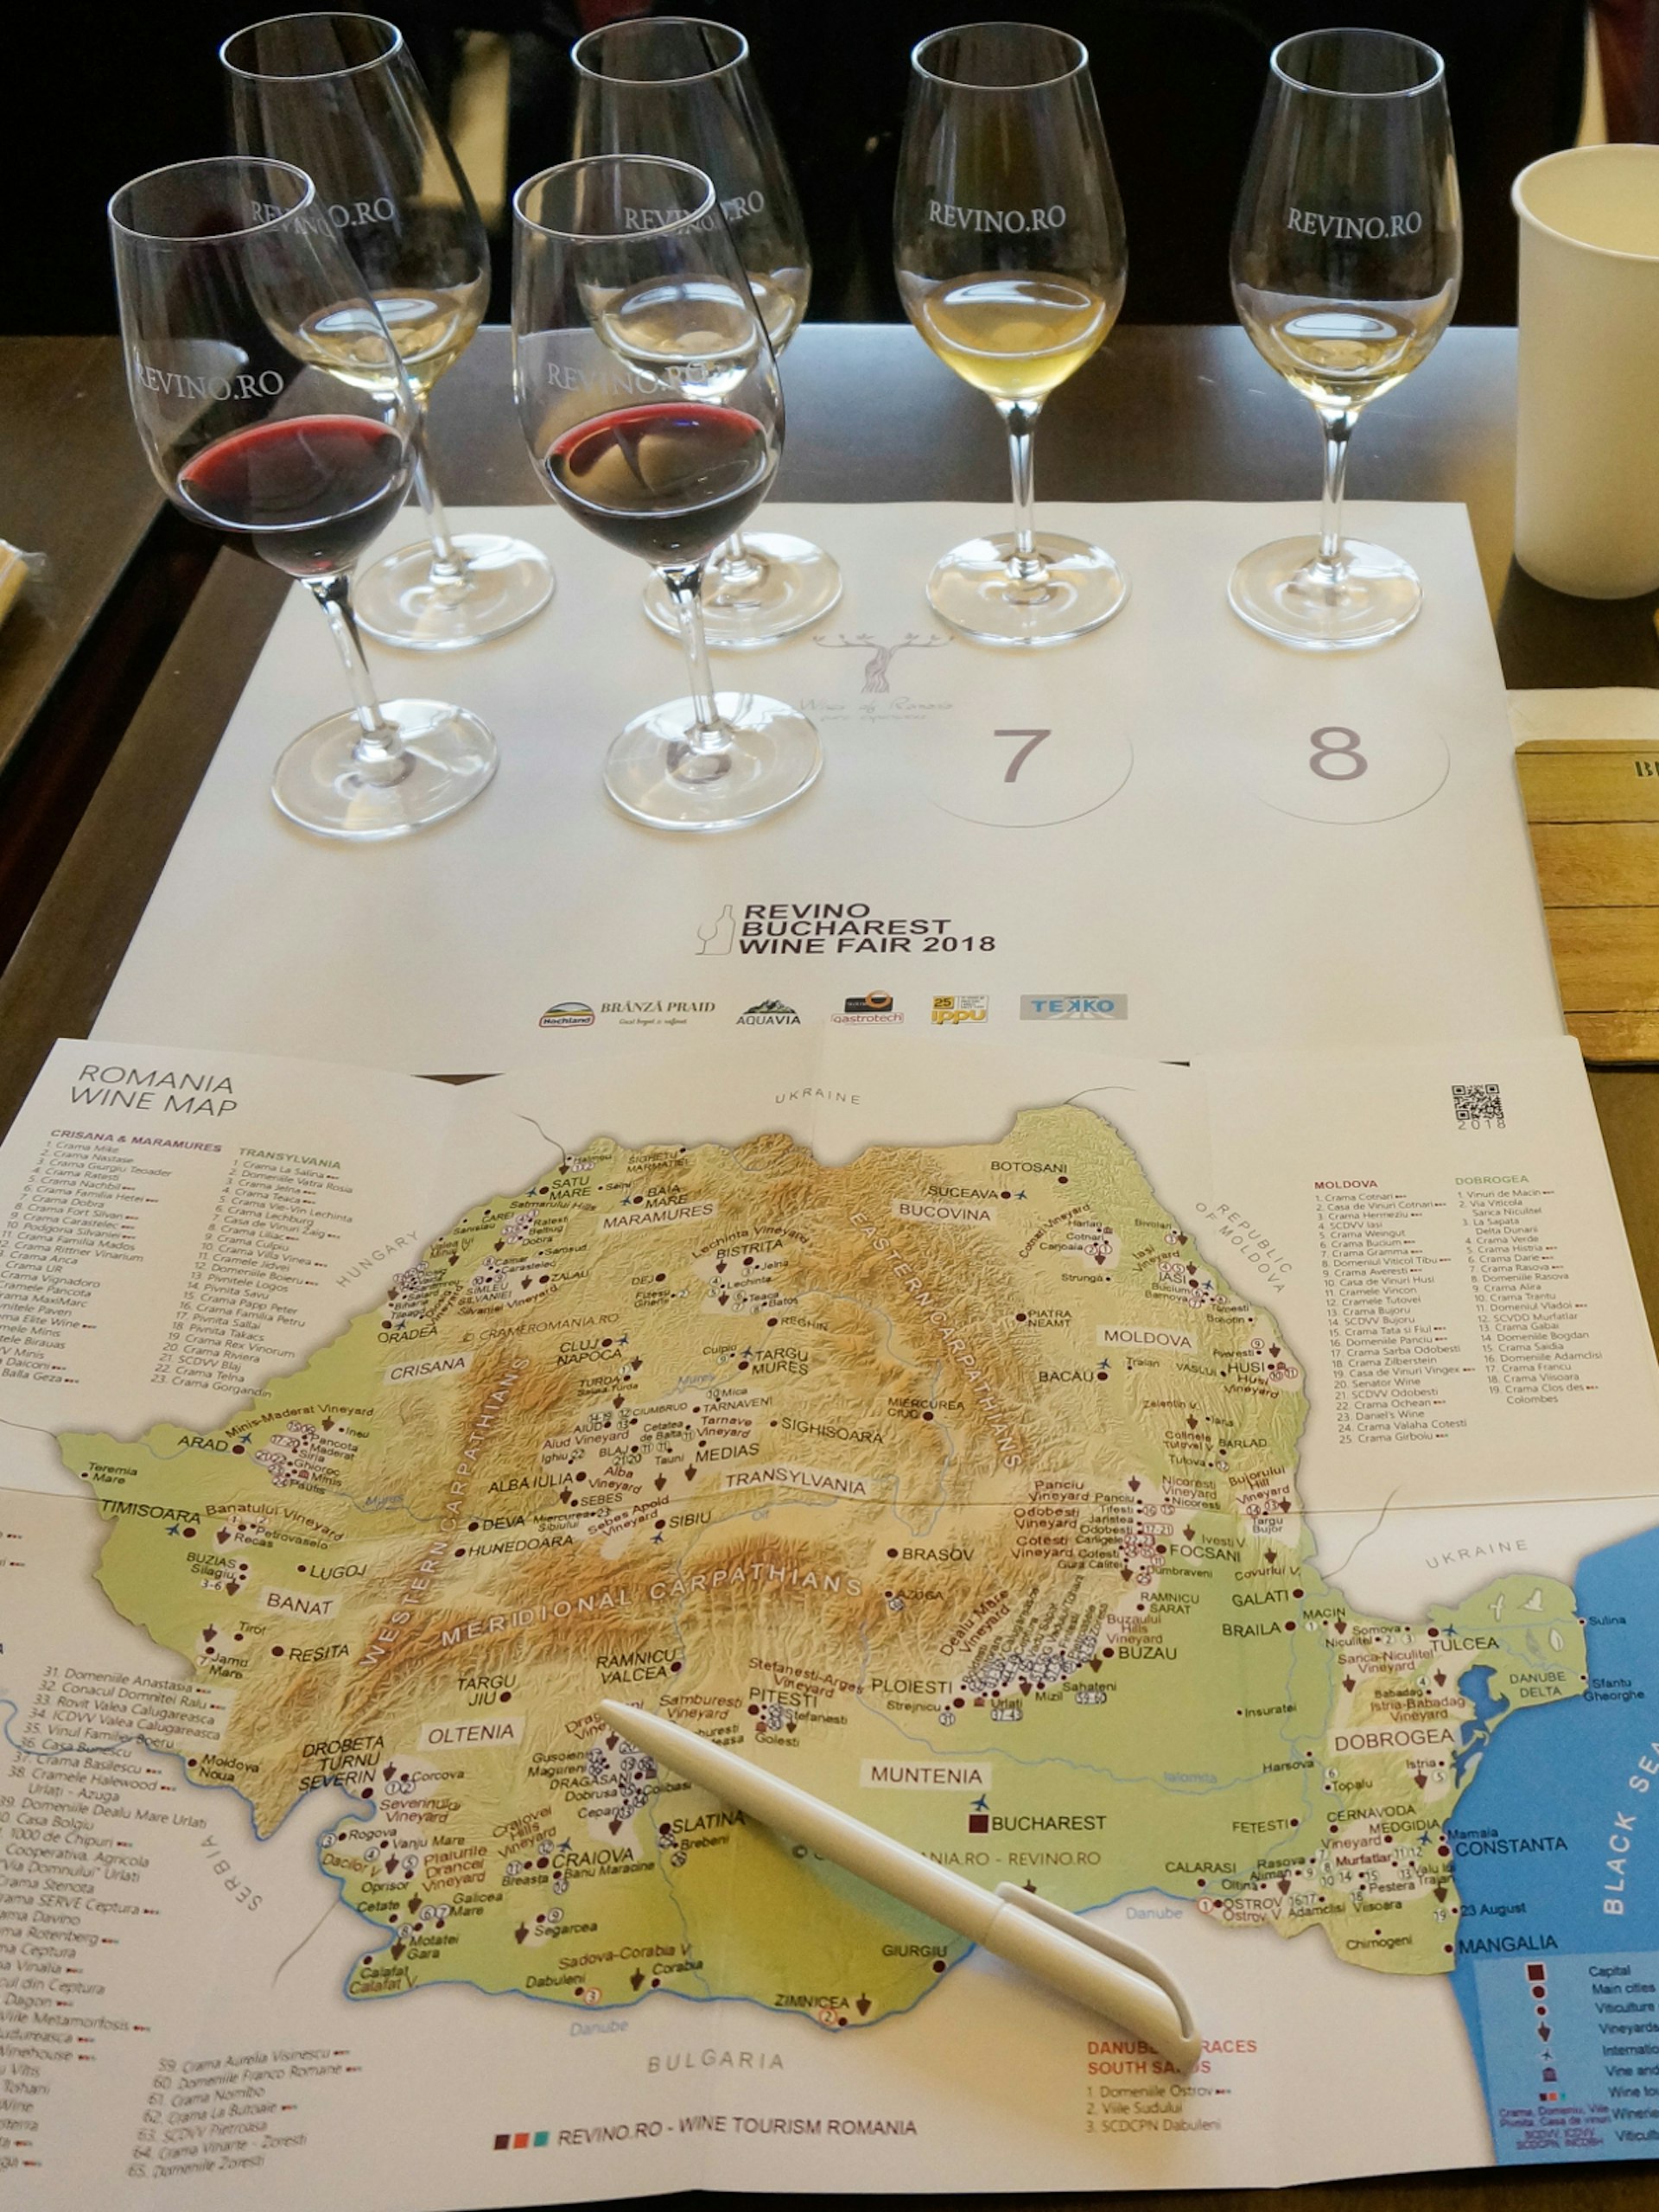 Wine glasses and a map of Romanian wine regions on a table at a wine fair in Bucharest